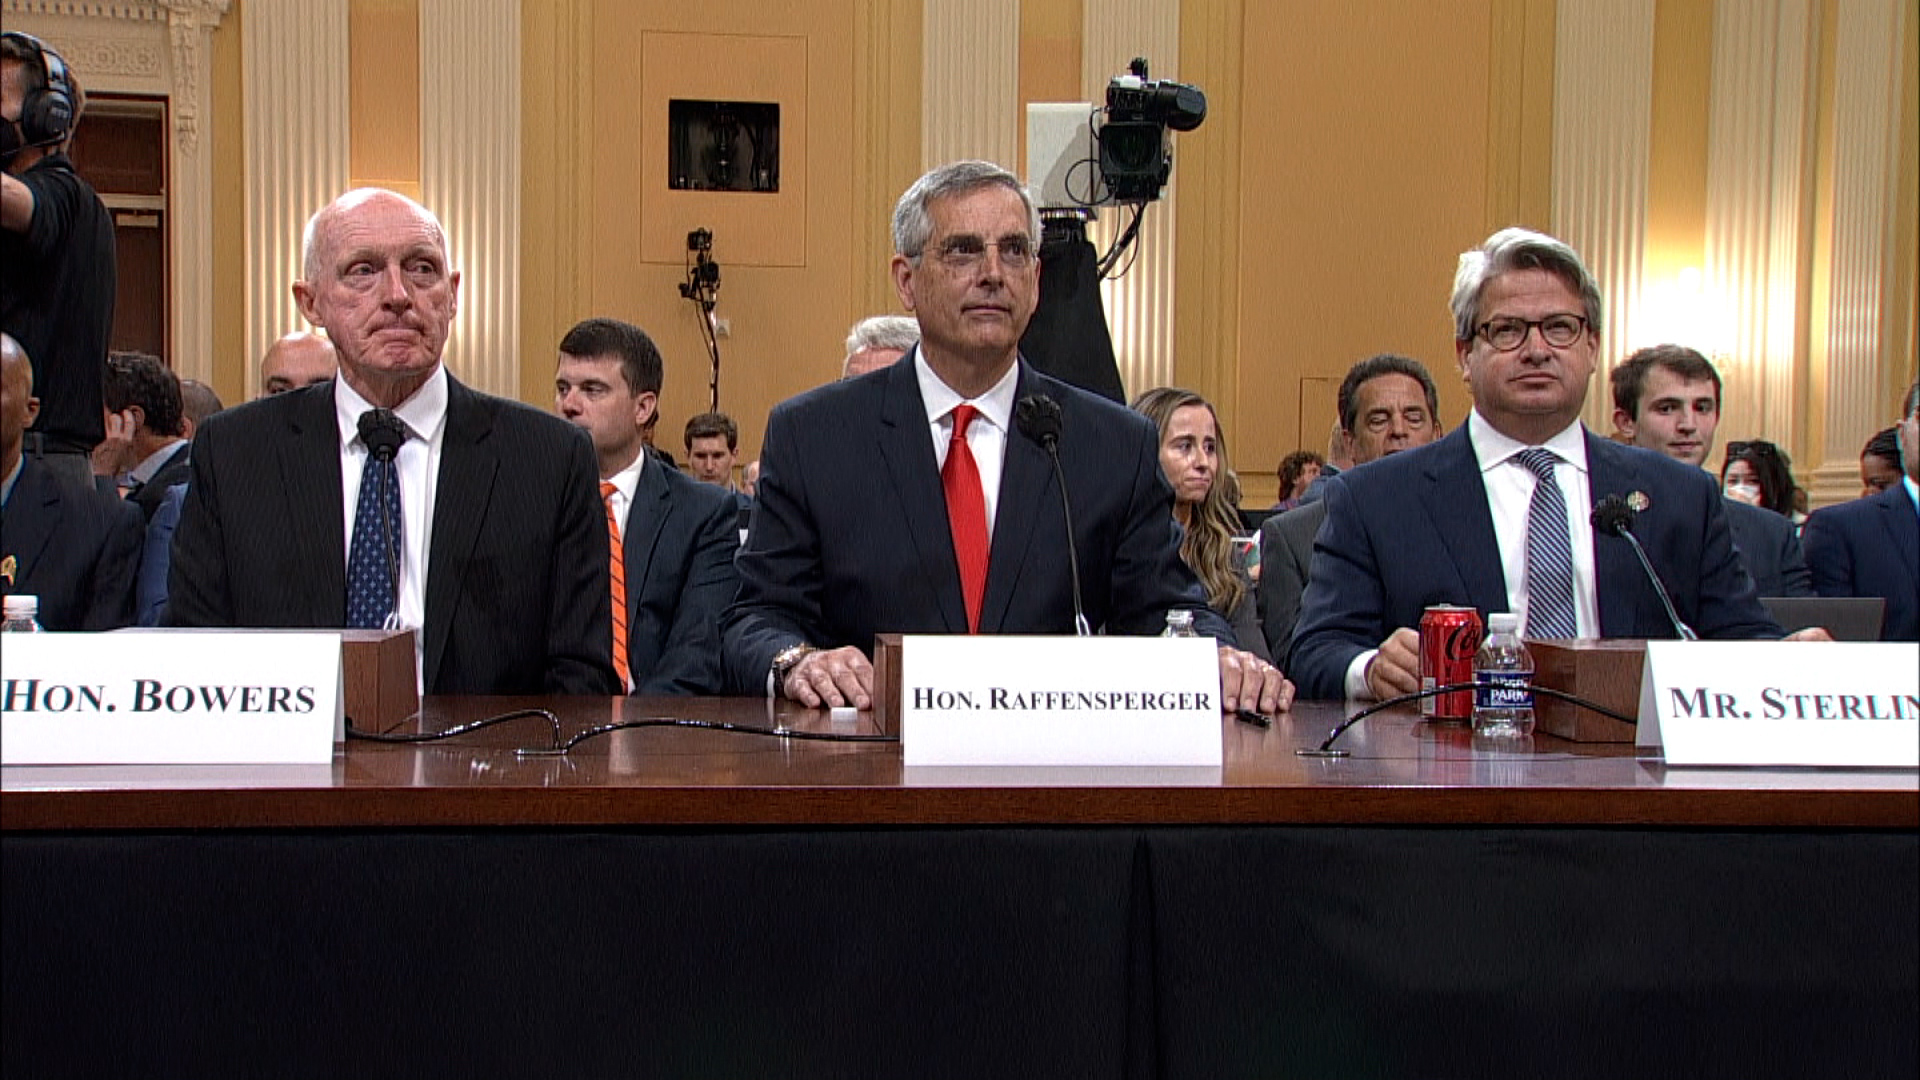 Three witnesses are seated before Tuesday's hearing. From left are Arizona House Speaker Rusty Bowers, Georgia Secretary of State Brad Raffensperger and Raffensperger's chief operating officer Gabe Sterling.